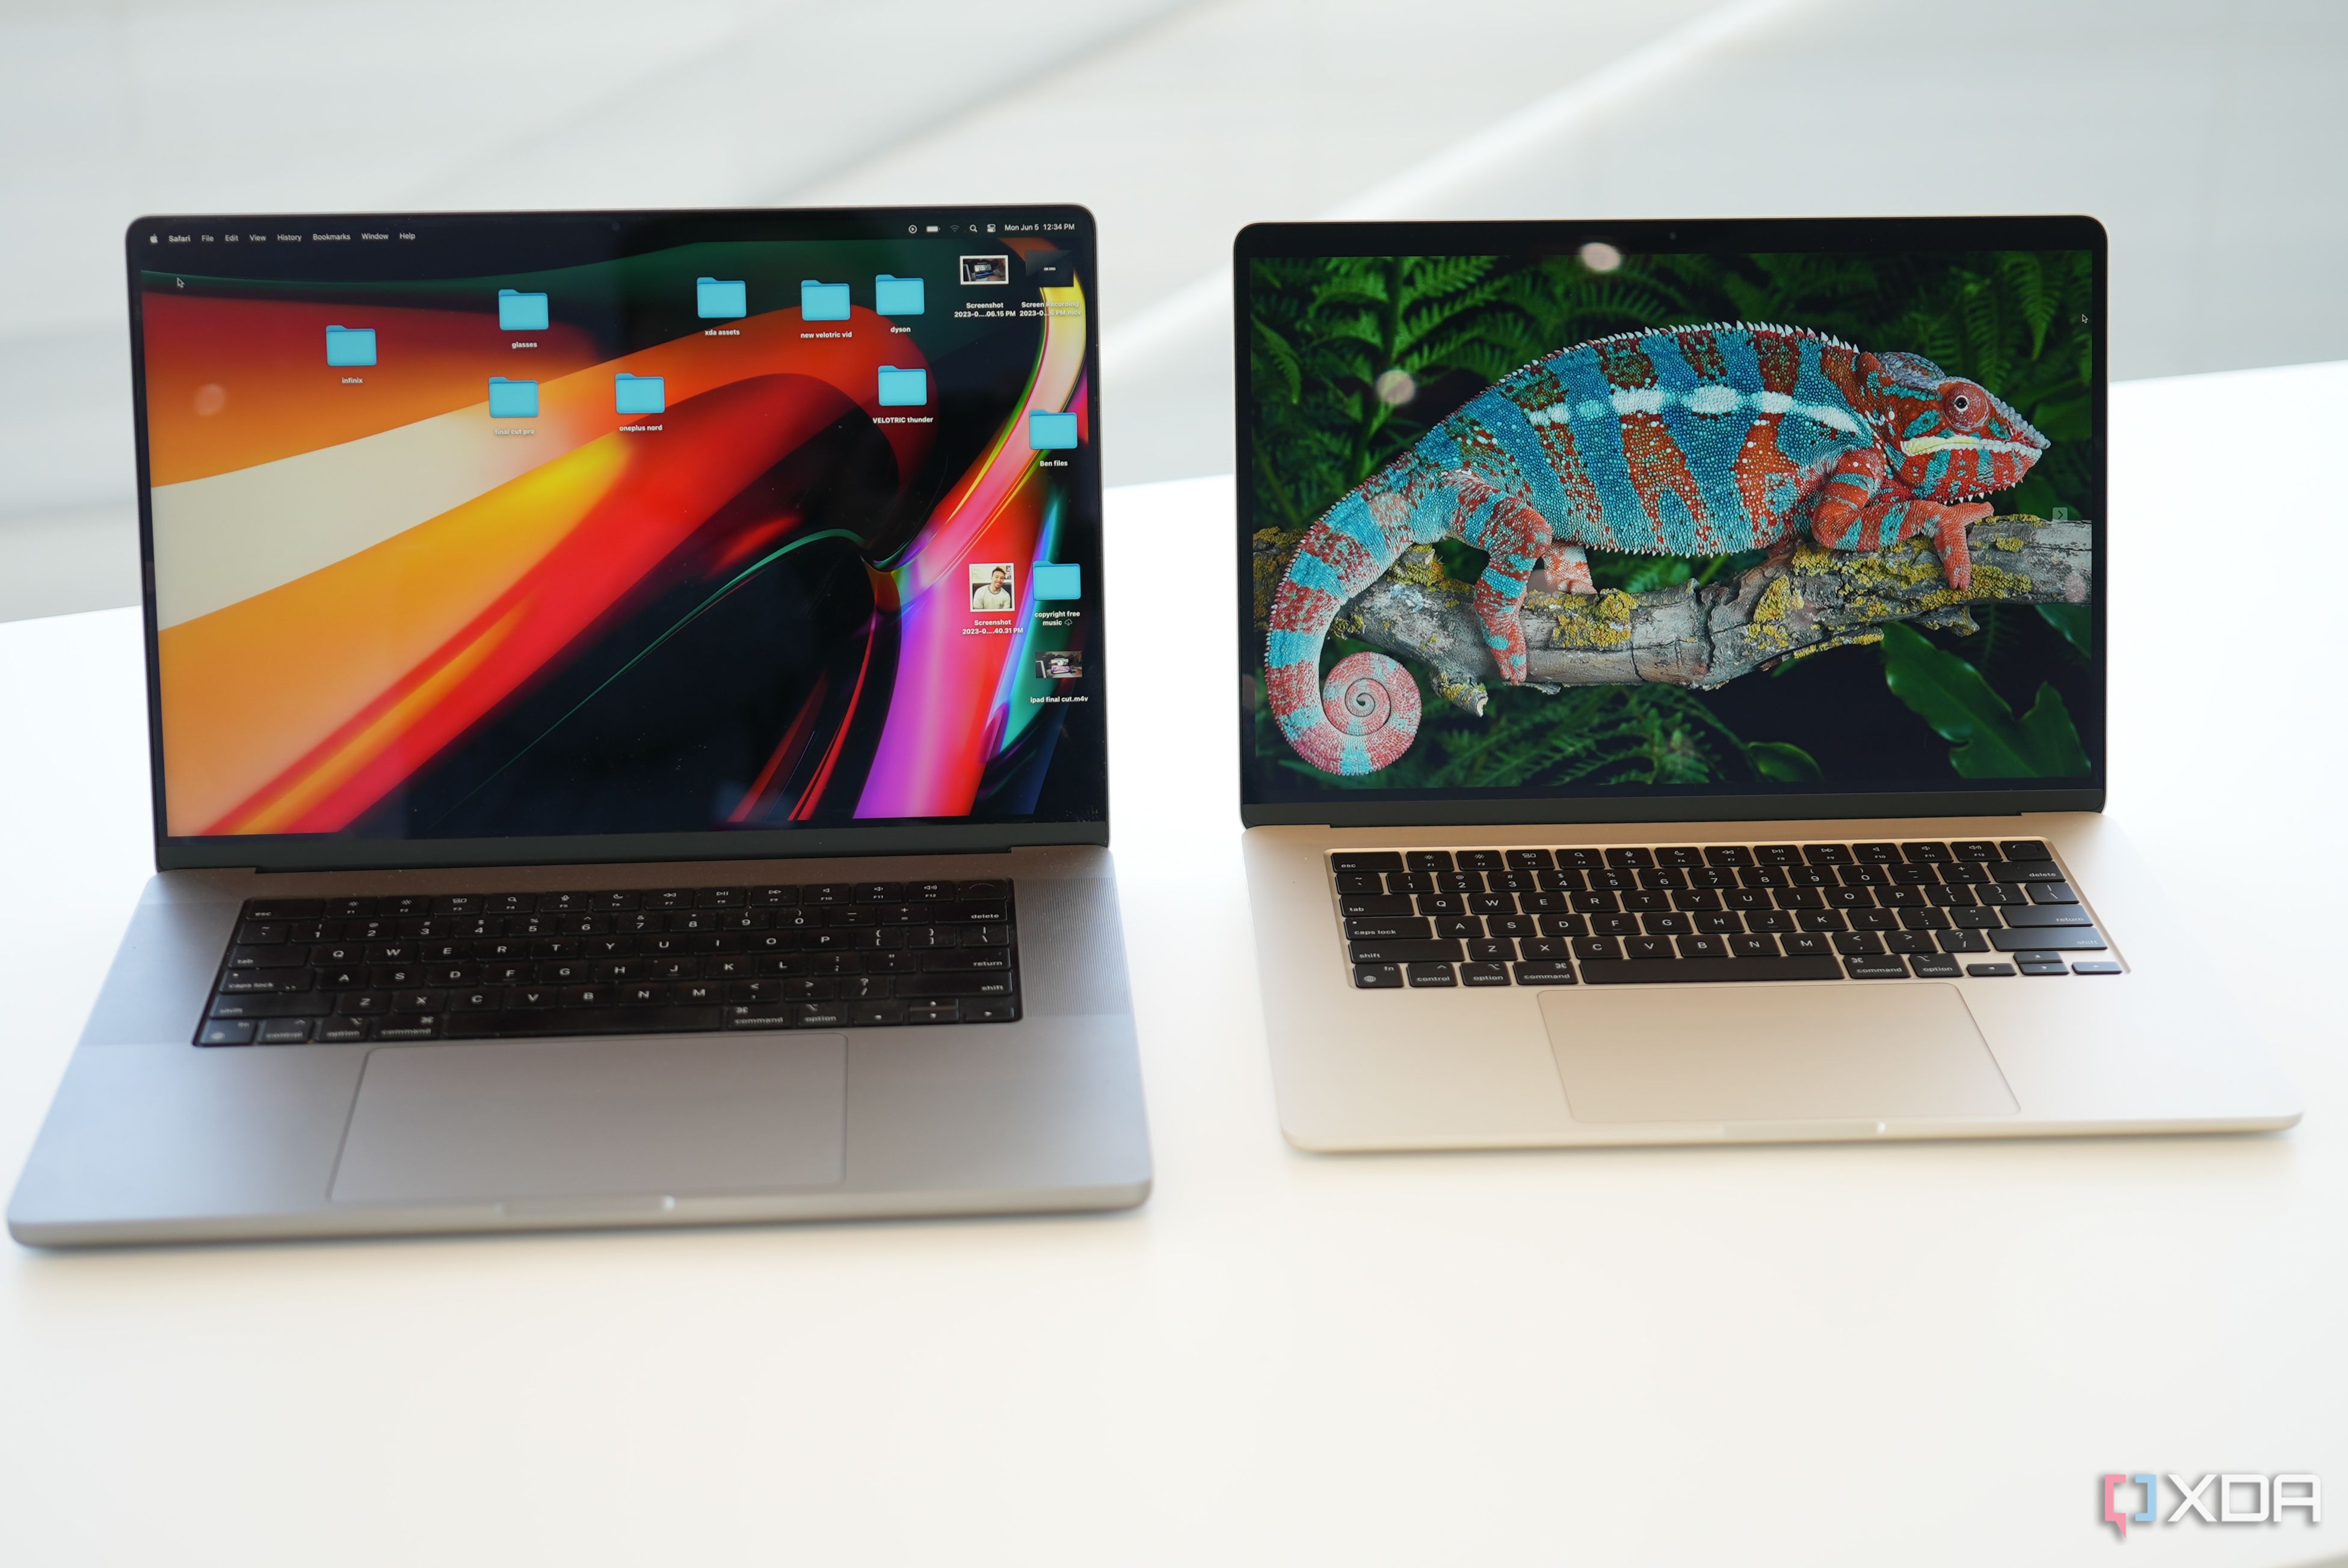 All MacBook M1 Pro and MacBook Pro M1 Max specs, screen sizes, and